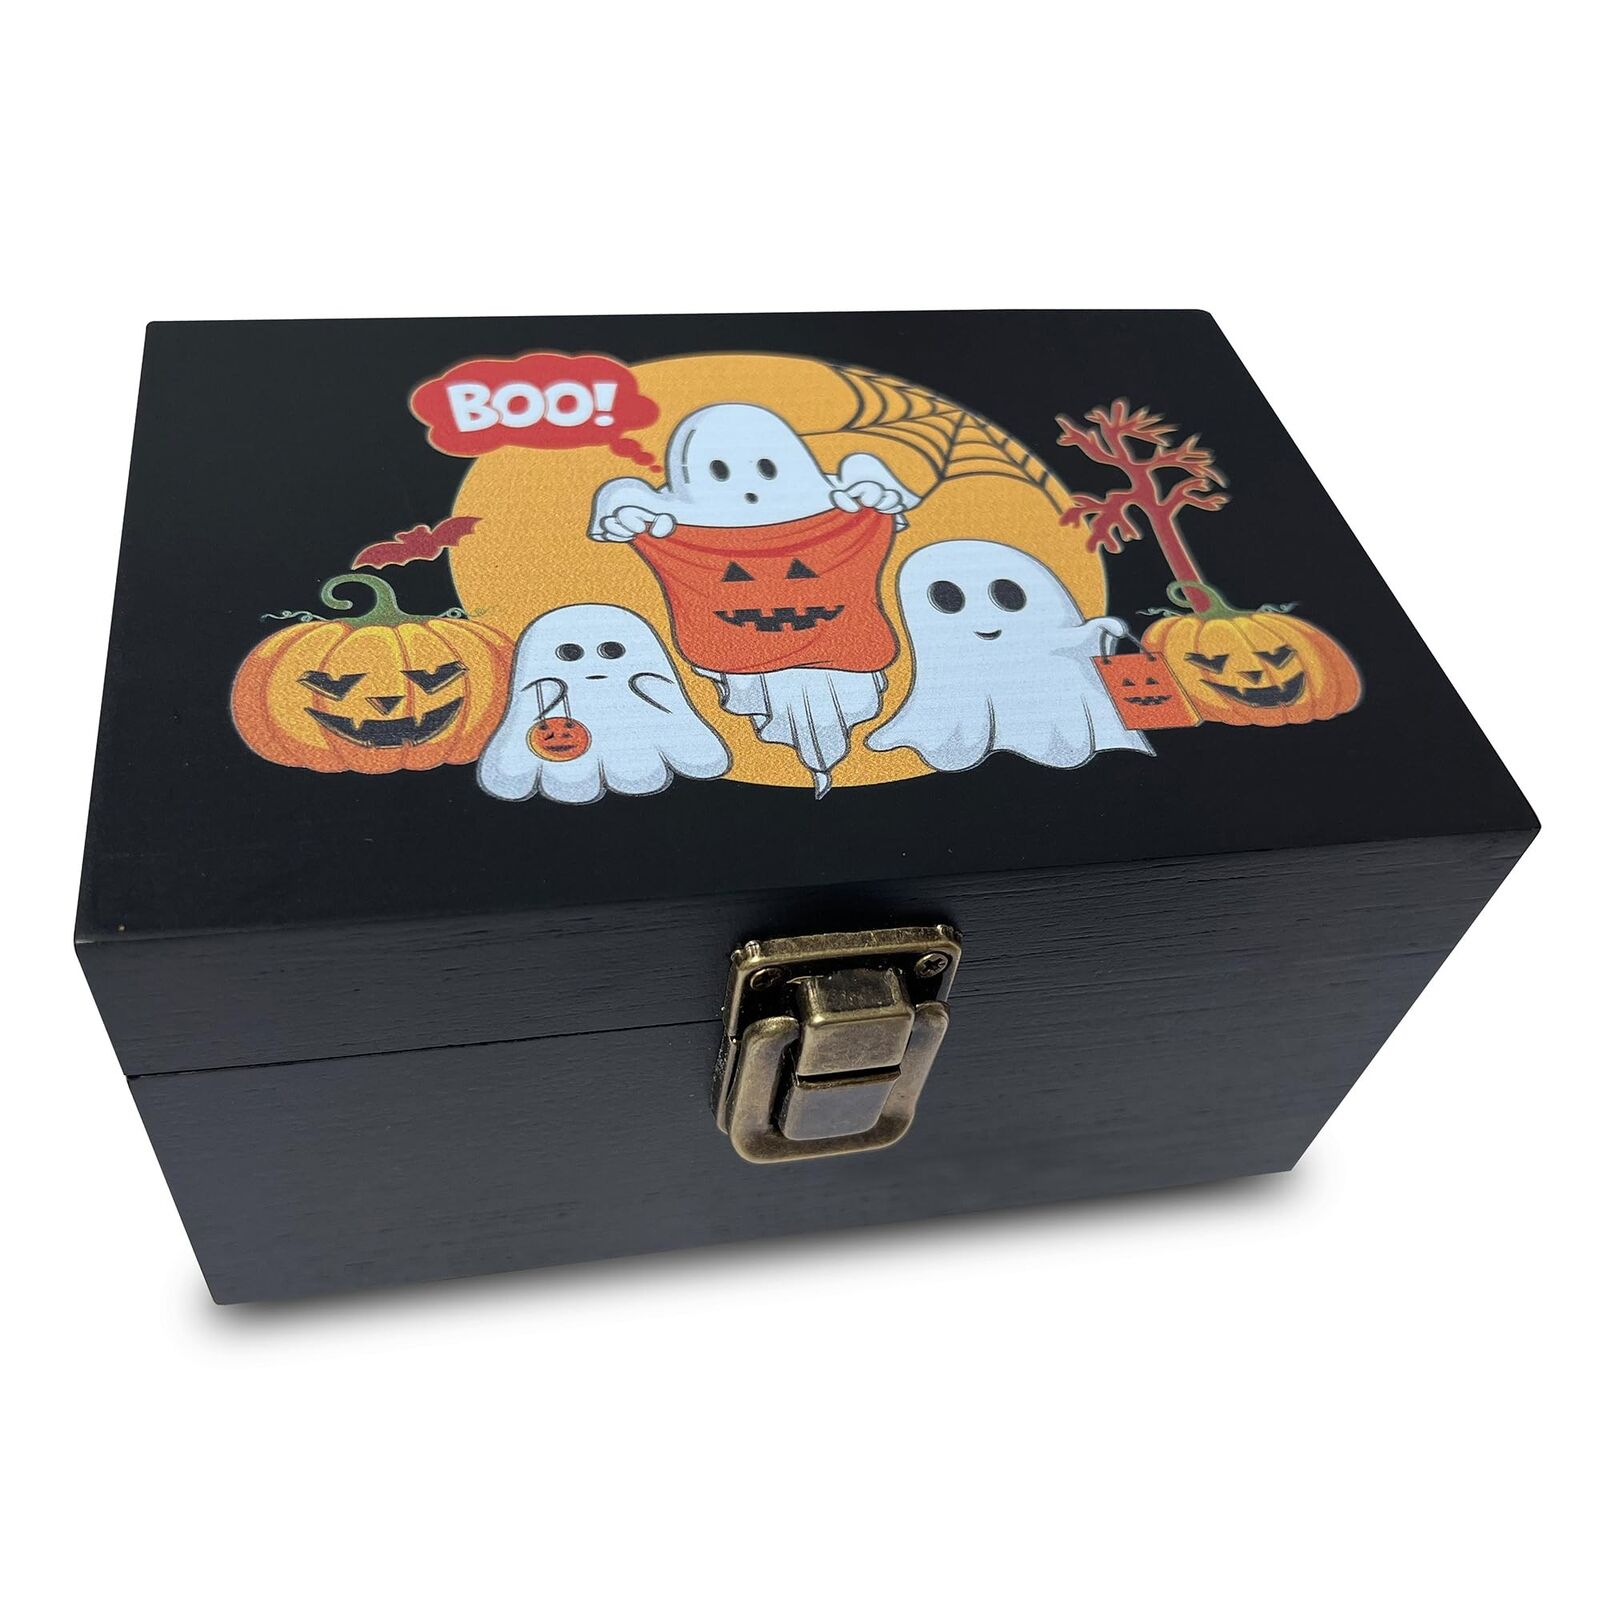 Happy Halloween Wooden Box for parties or trick or treating - Pumpkin Ghosts